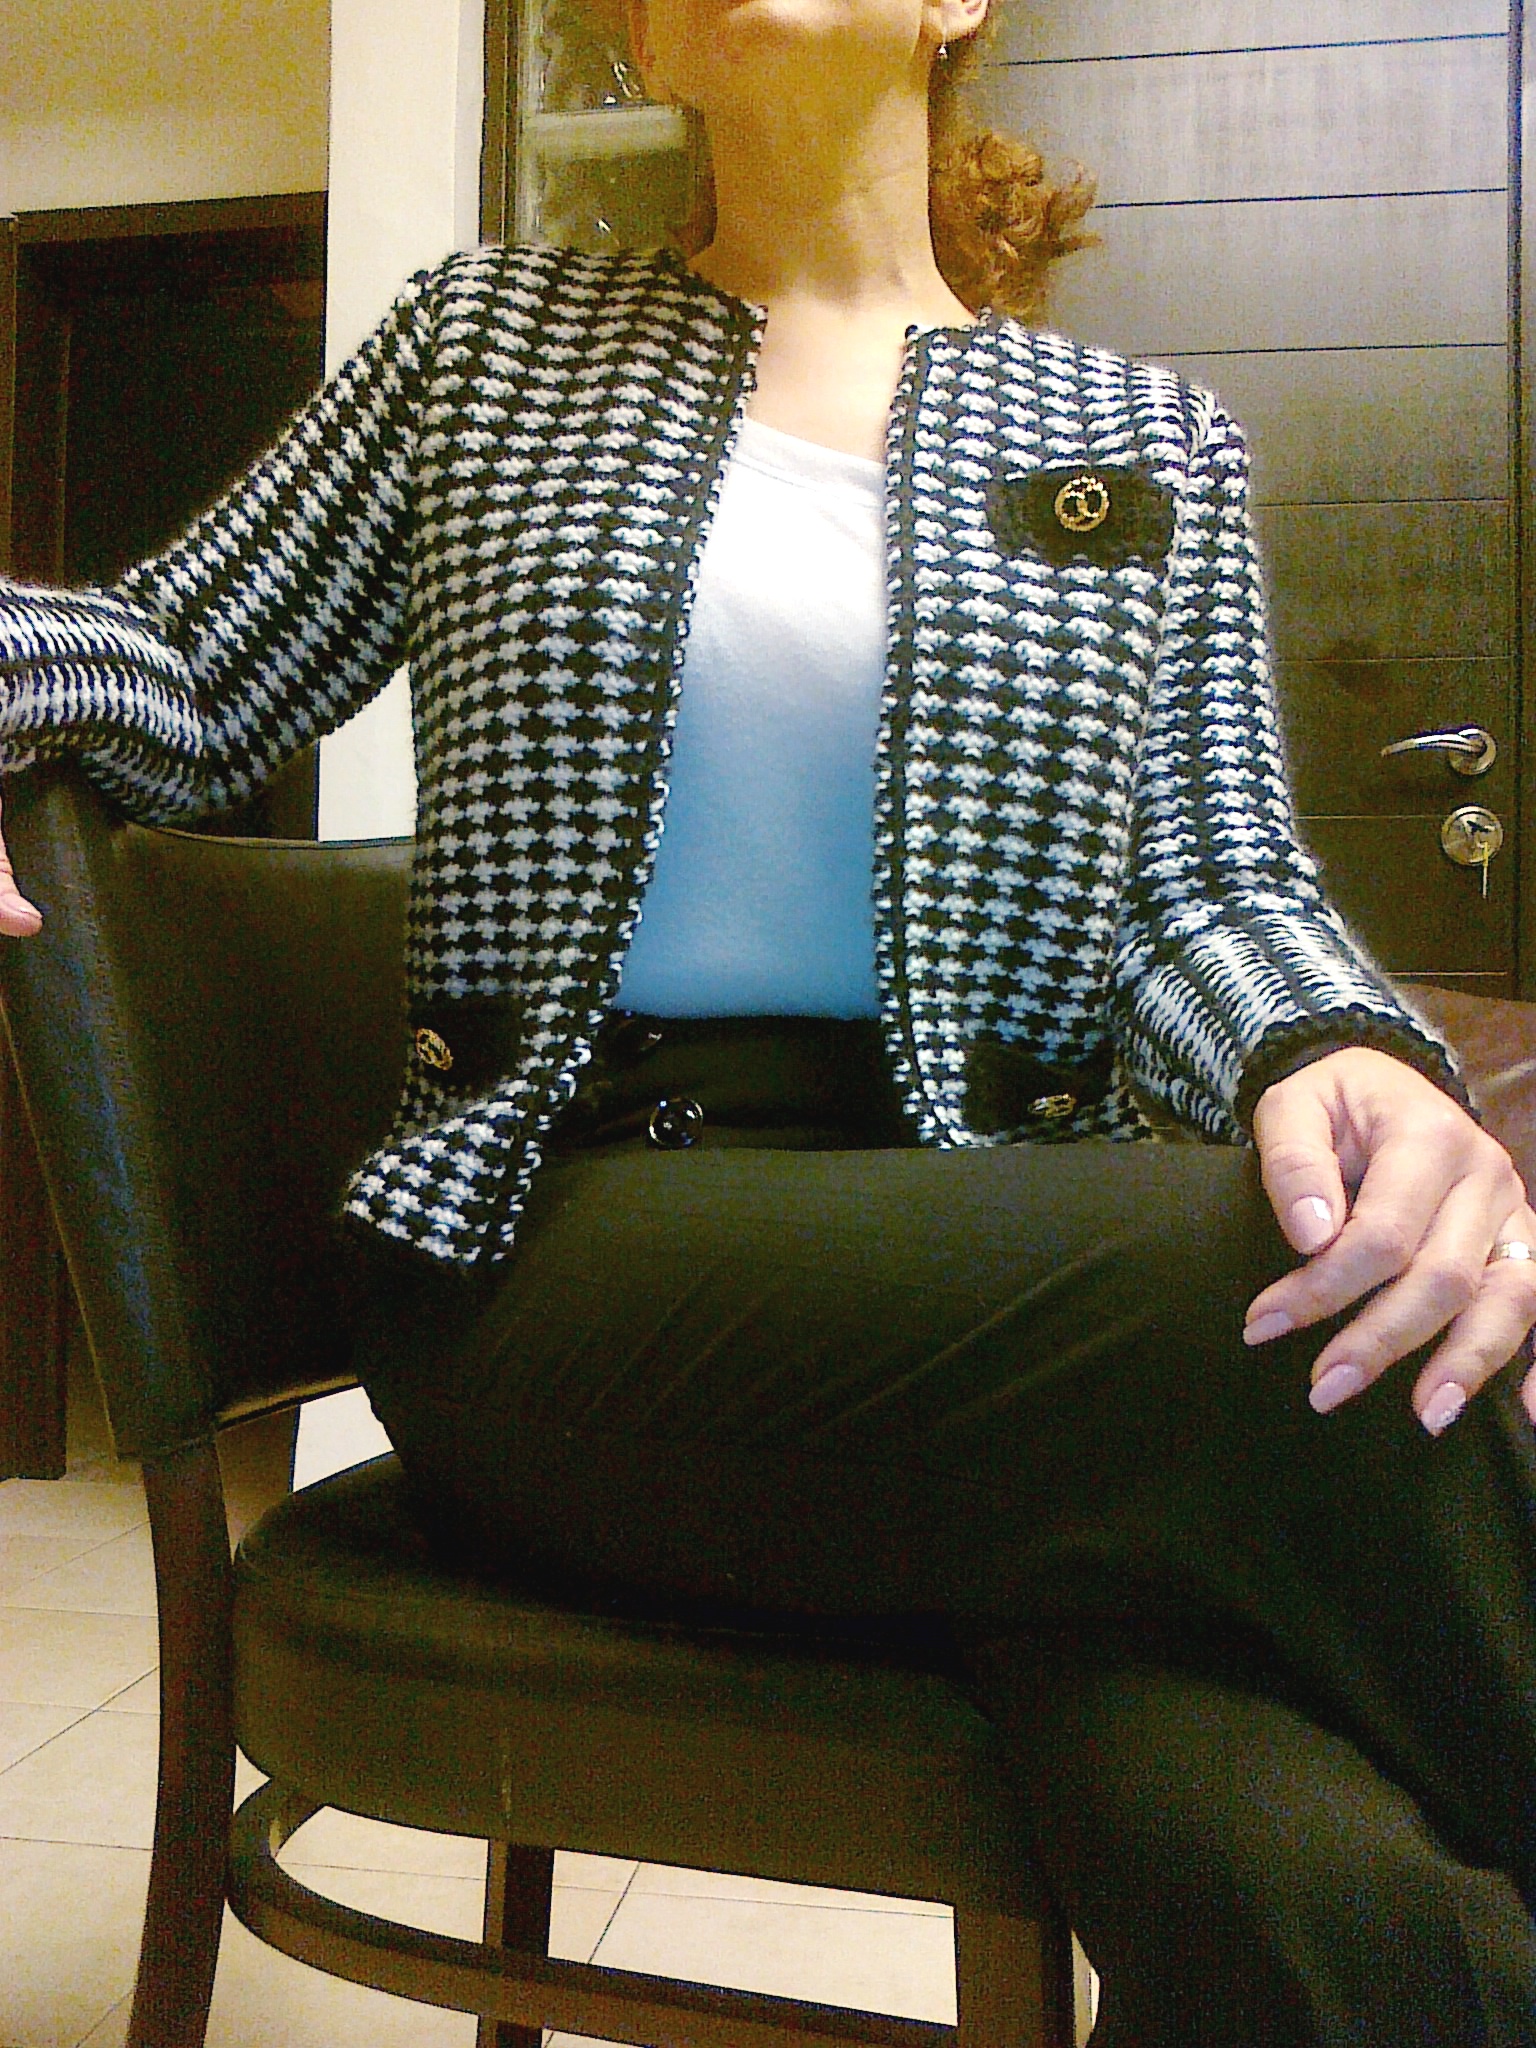 My own knit "Chanel" Jacket – Sewing Projects | BurdaStyle.com